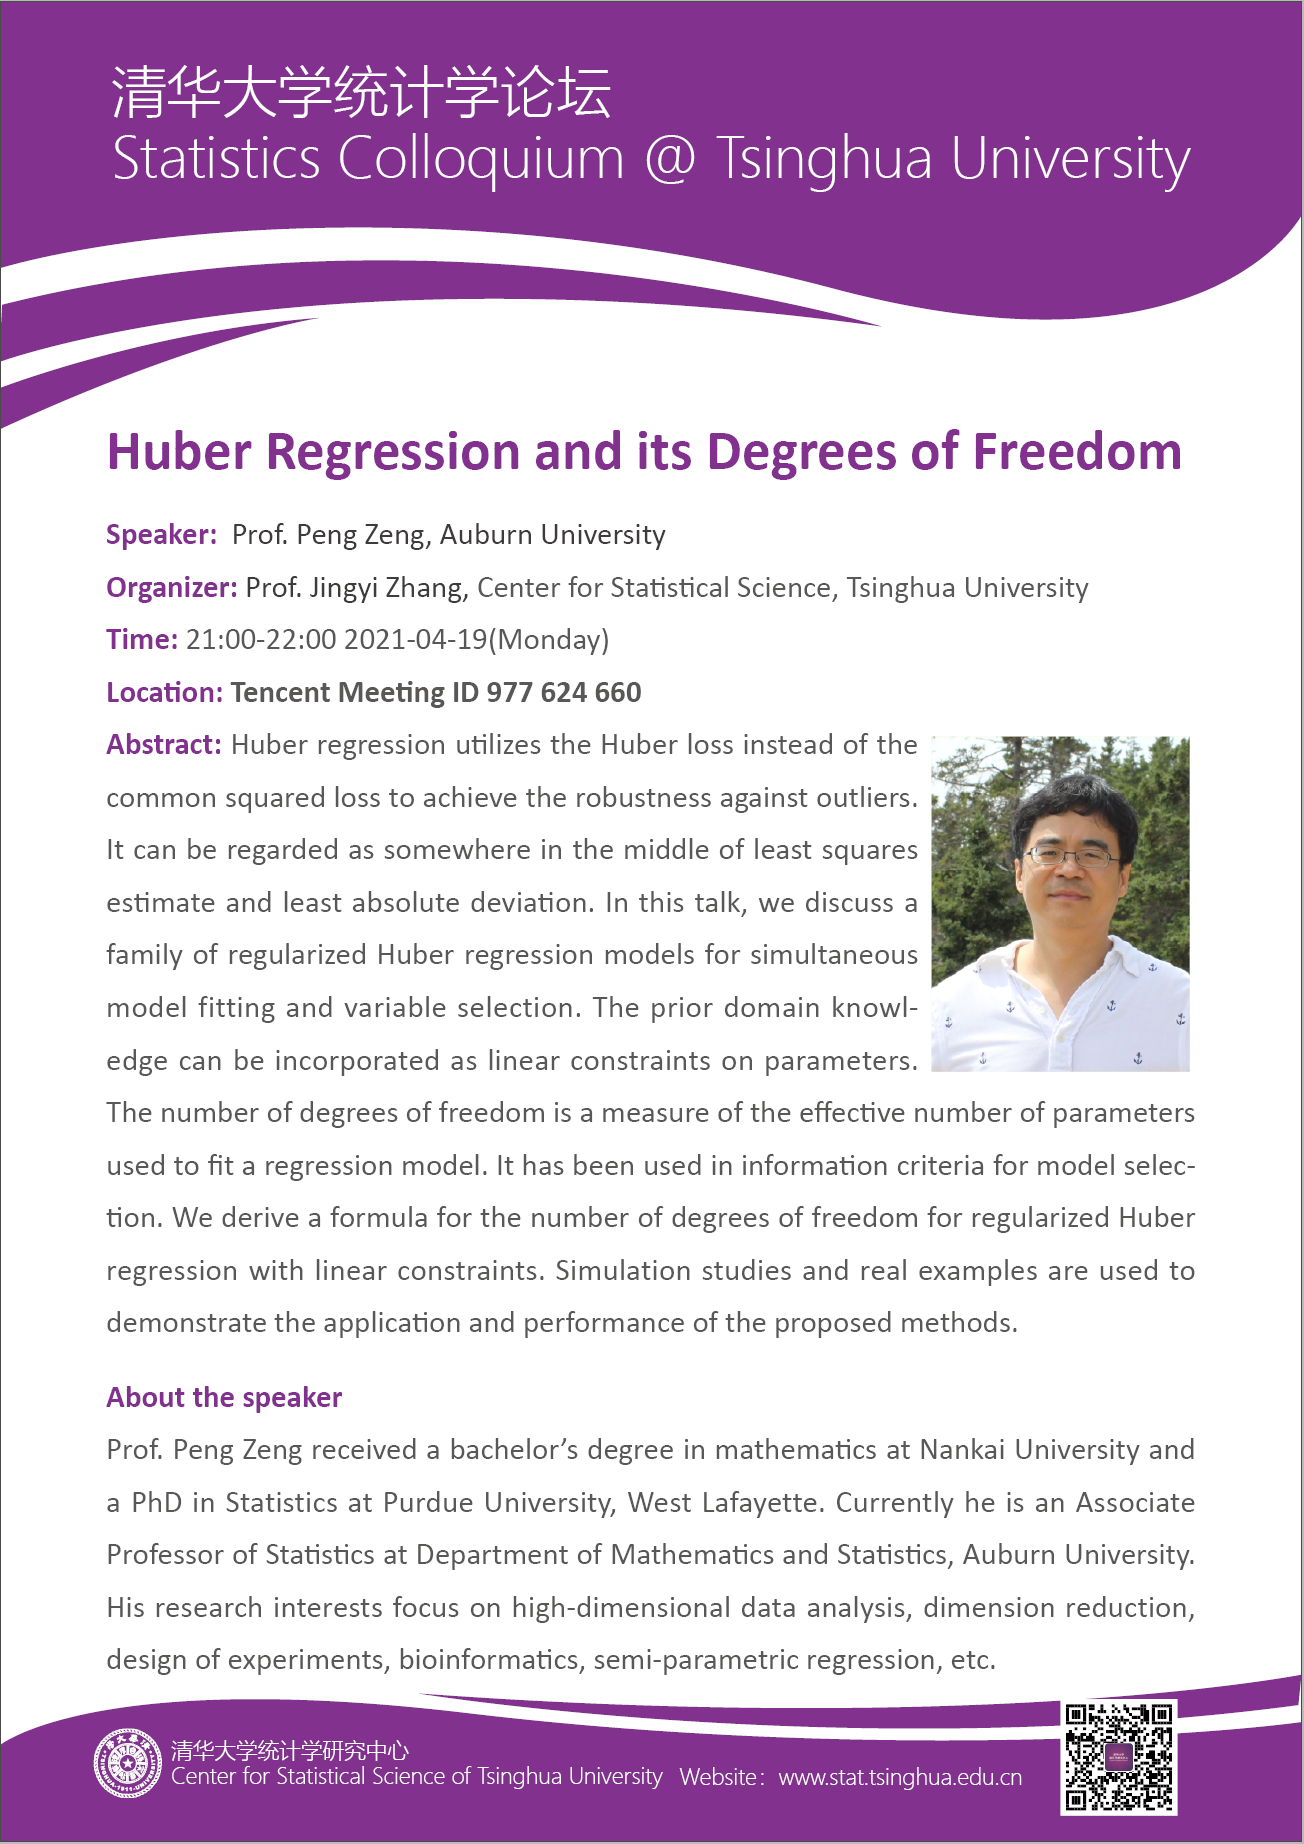 Huber Regression and its Degrees of Freedom